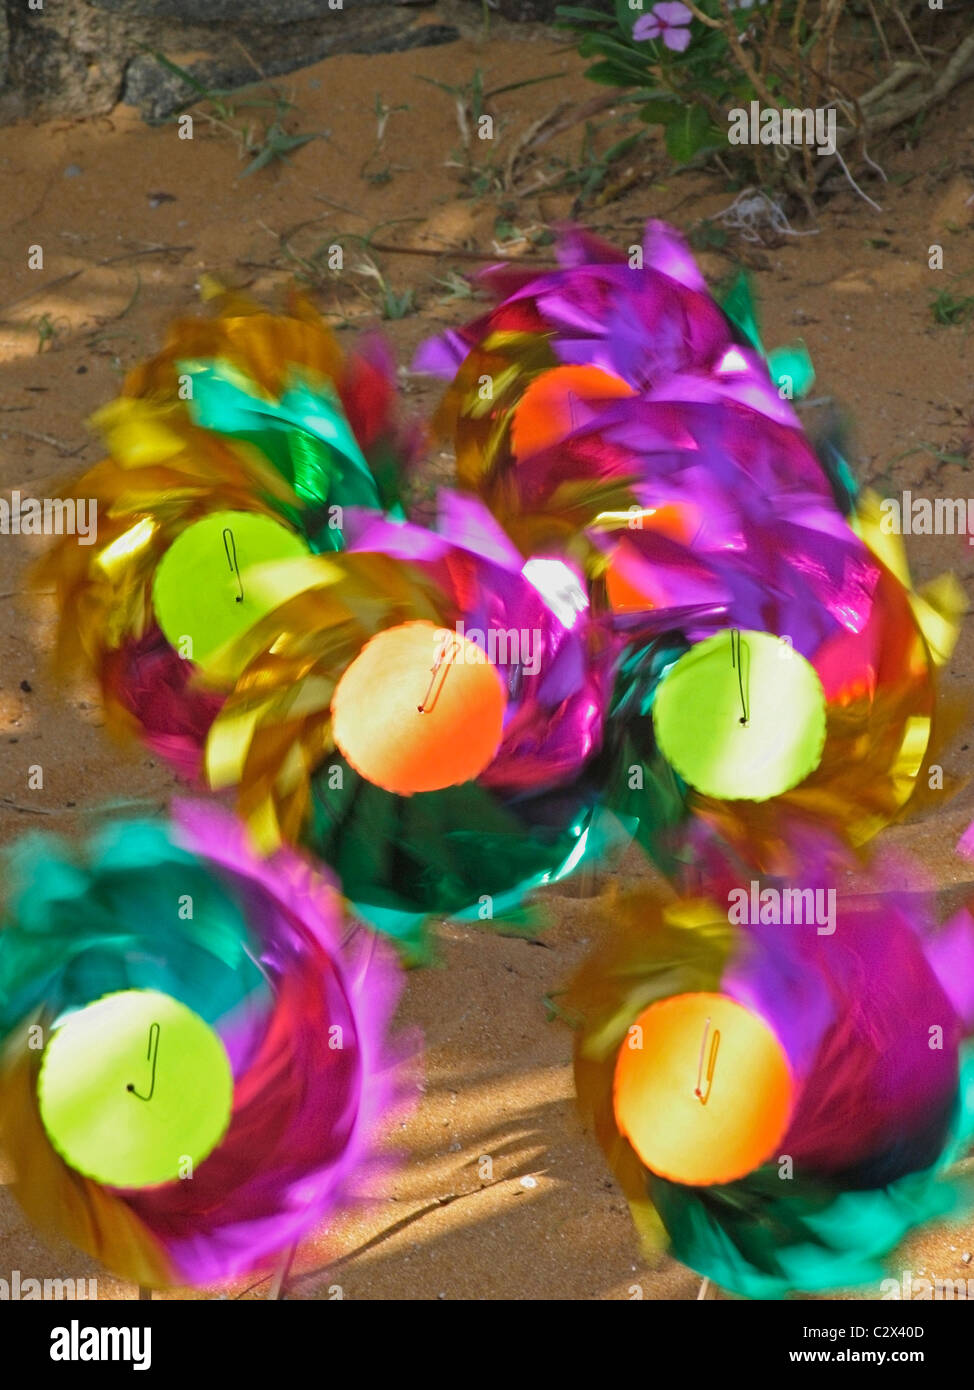 Colorful Spinning wheels Stock Photo